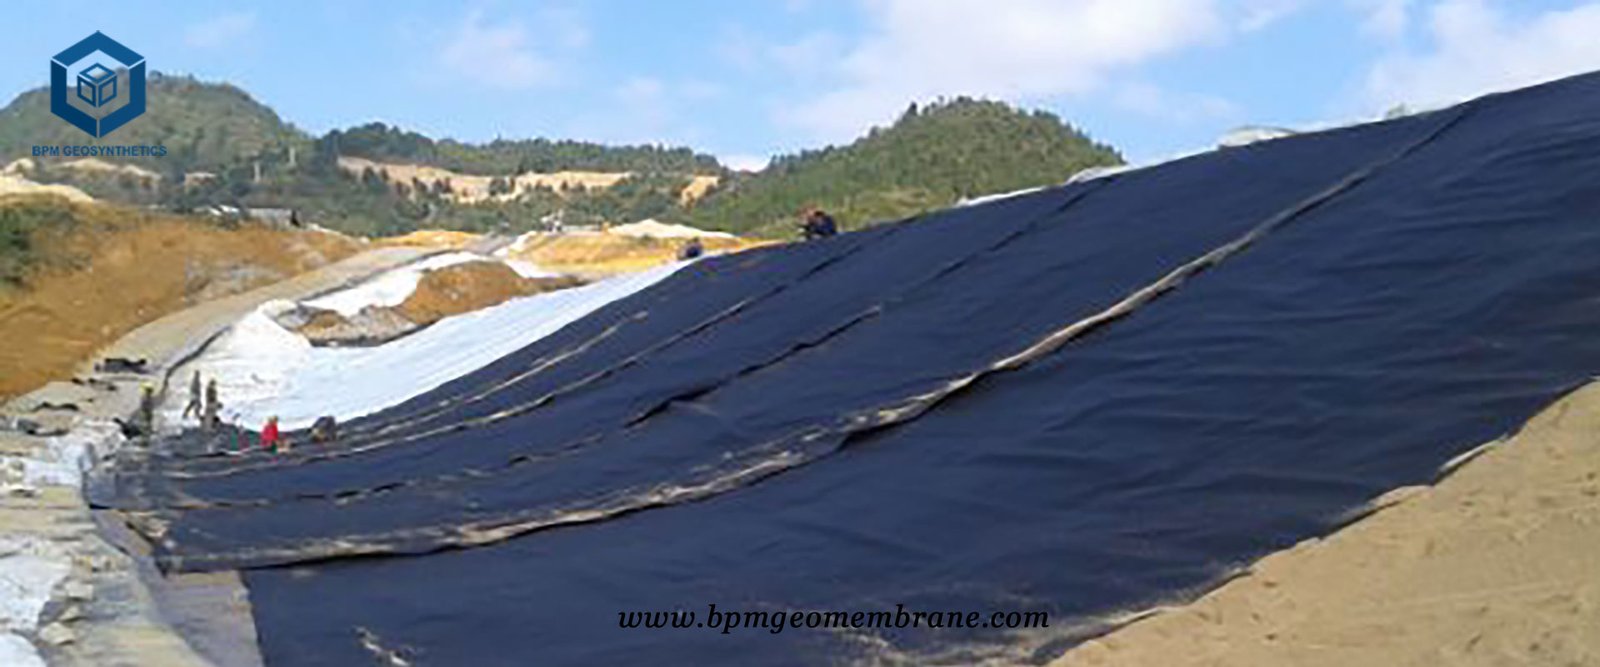 BPM Membrana HDPE Liner for Mining Project in Tanzania